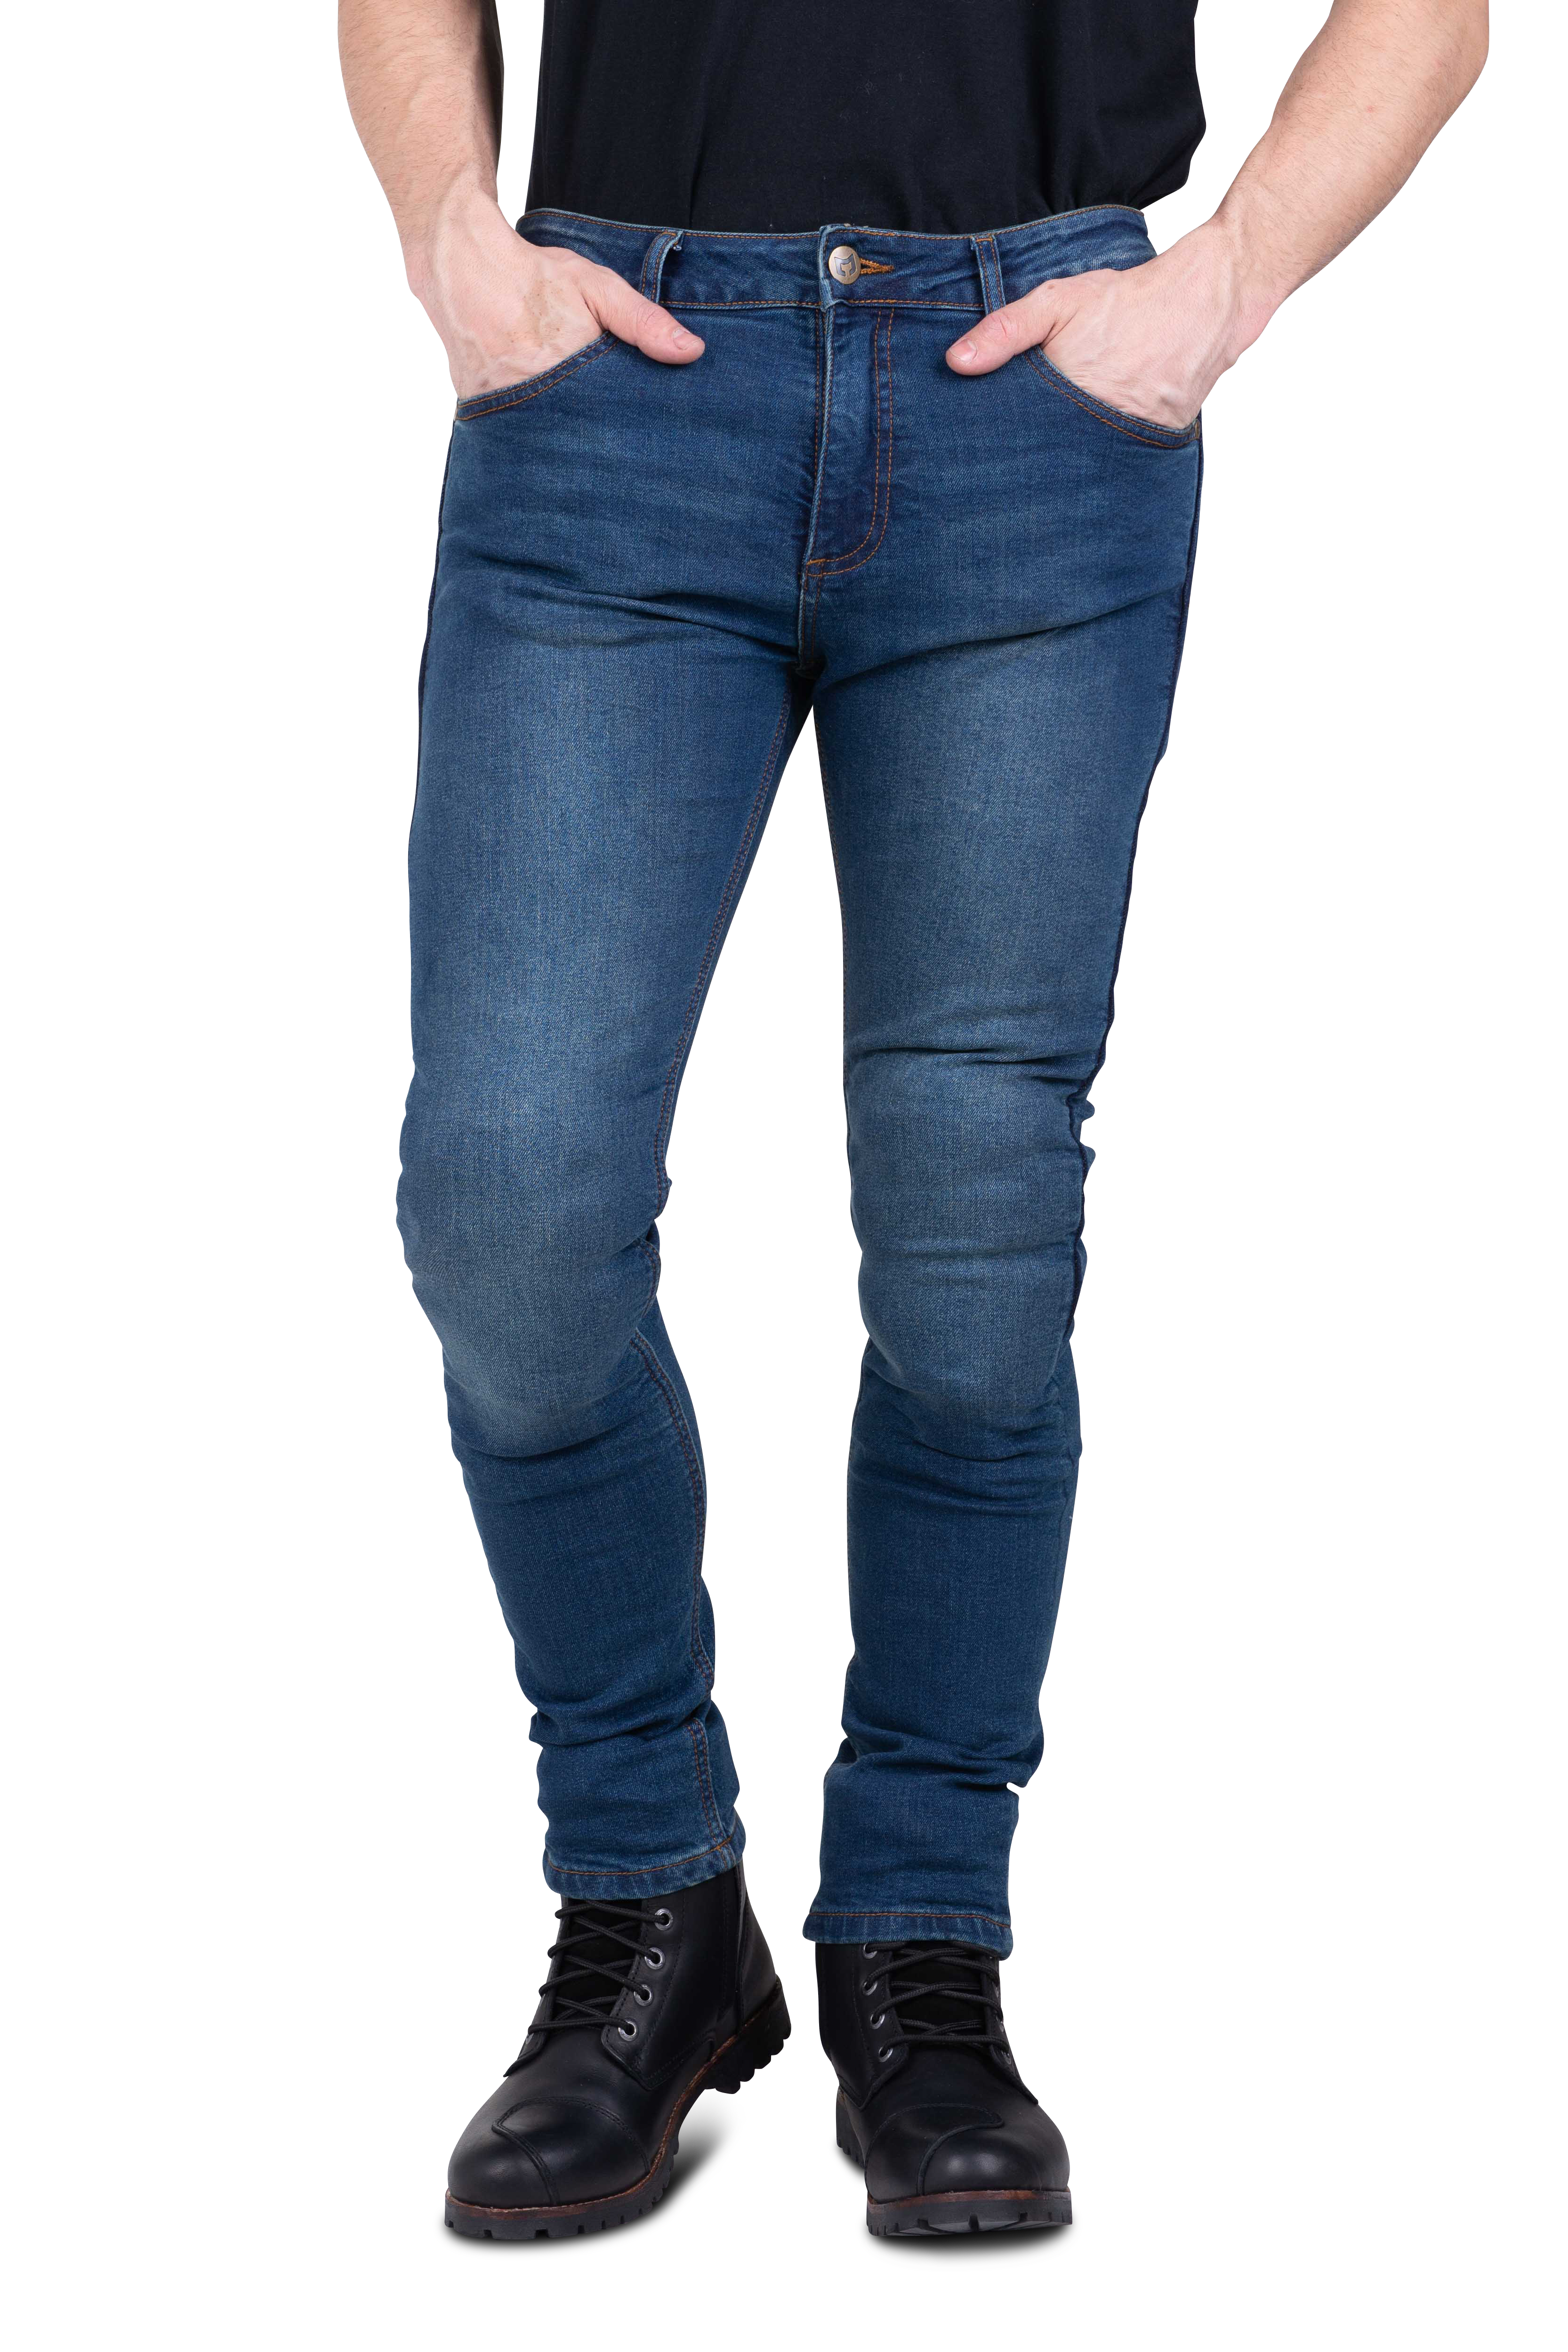 Course Jeans Moto  Norman Tapered Fit Blu Scuro